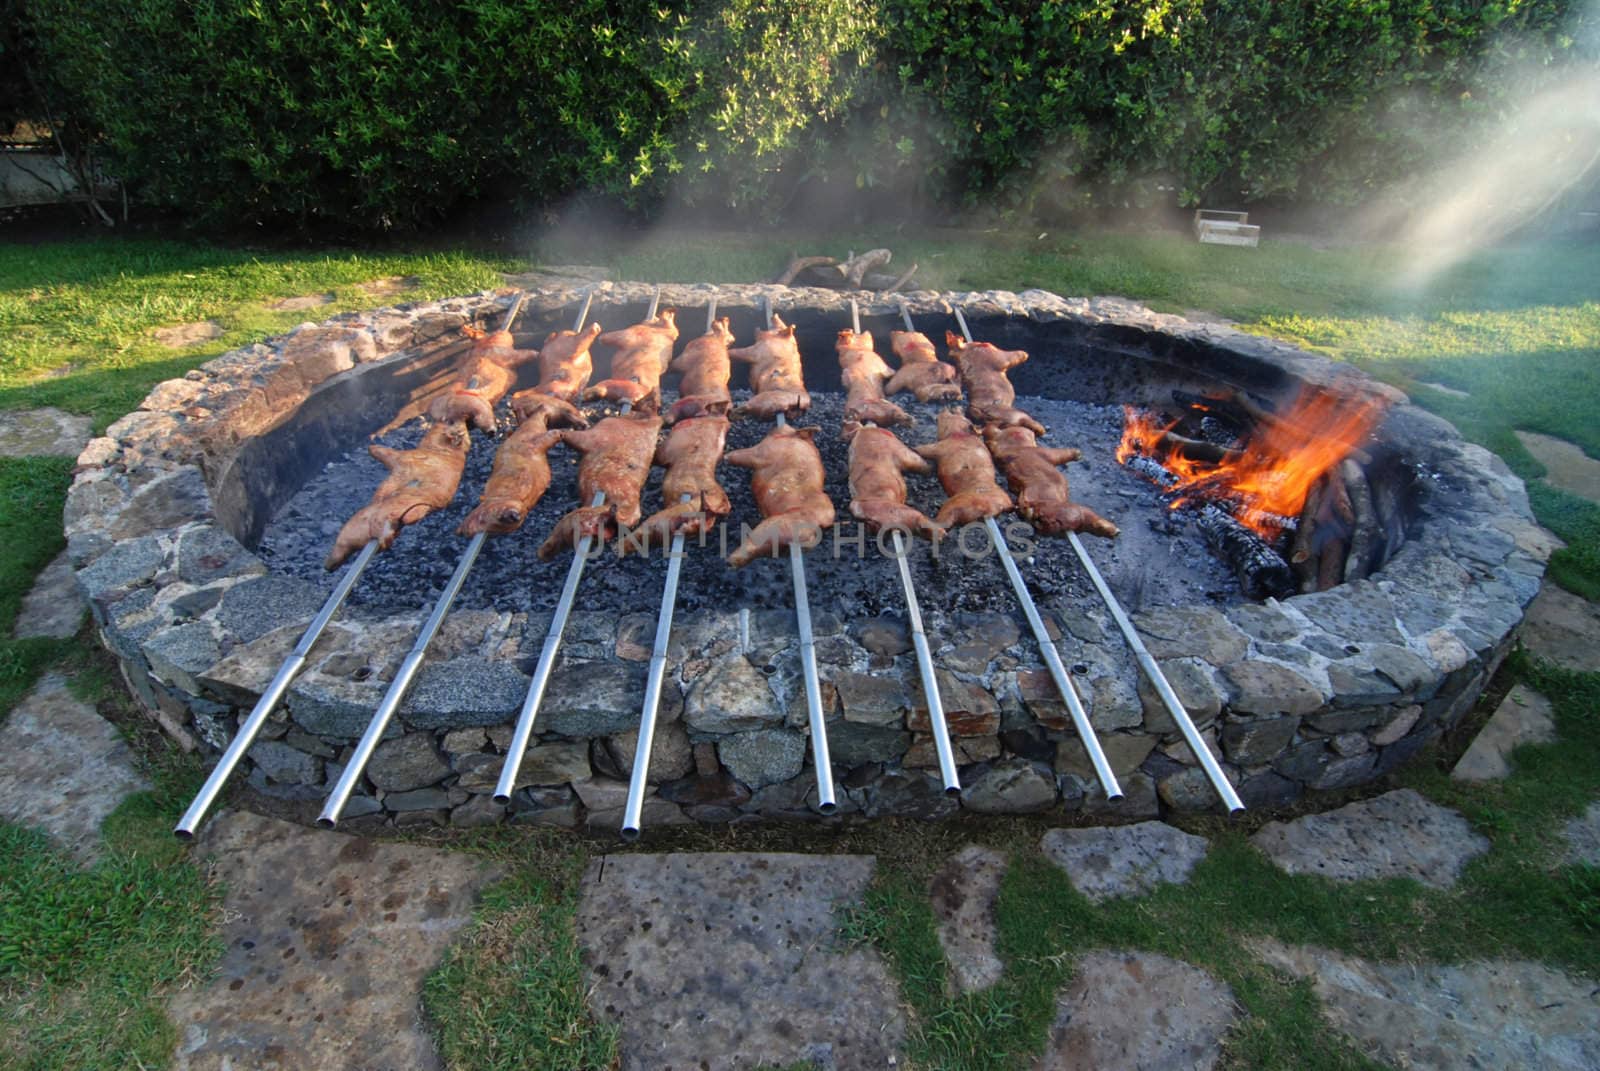 Barbecue with smoke of young suckling pigs